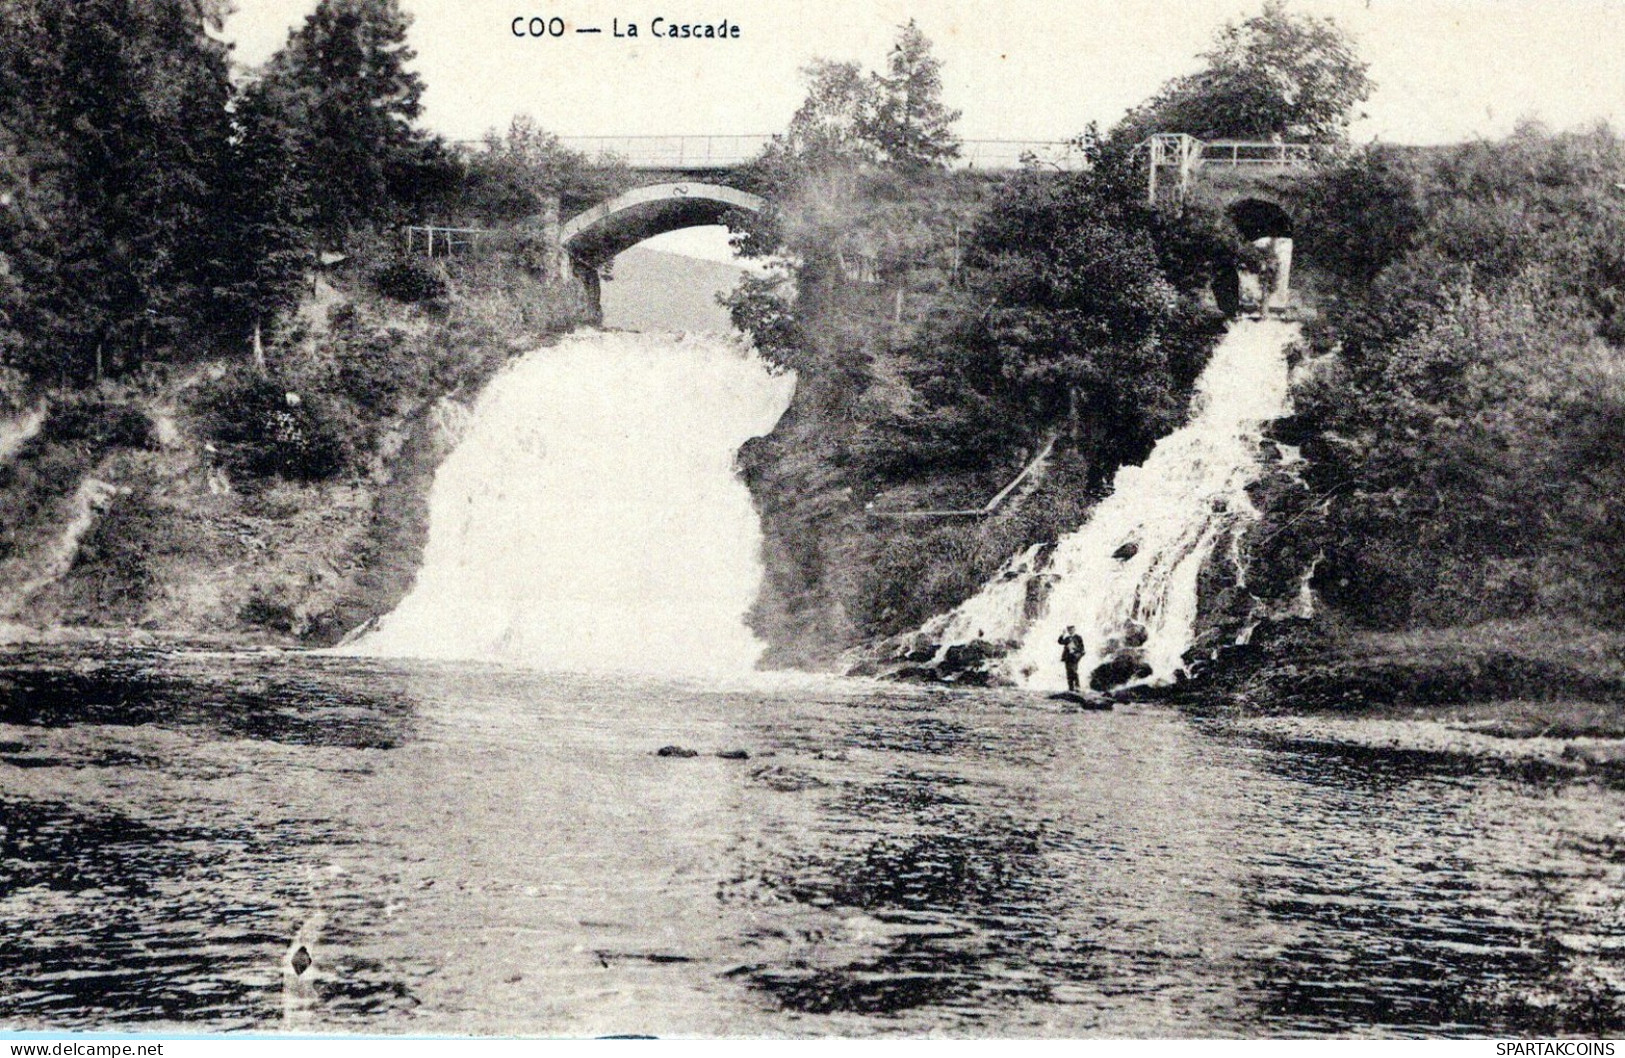 BELGIUM COO WATERFALL Province Of Liège Postcard CPA Unposted #PAD144.GB - Stavelot